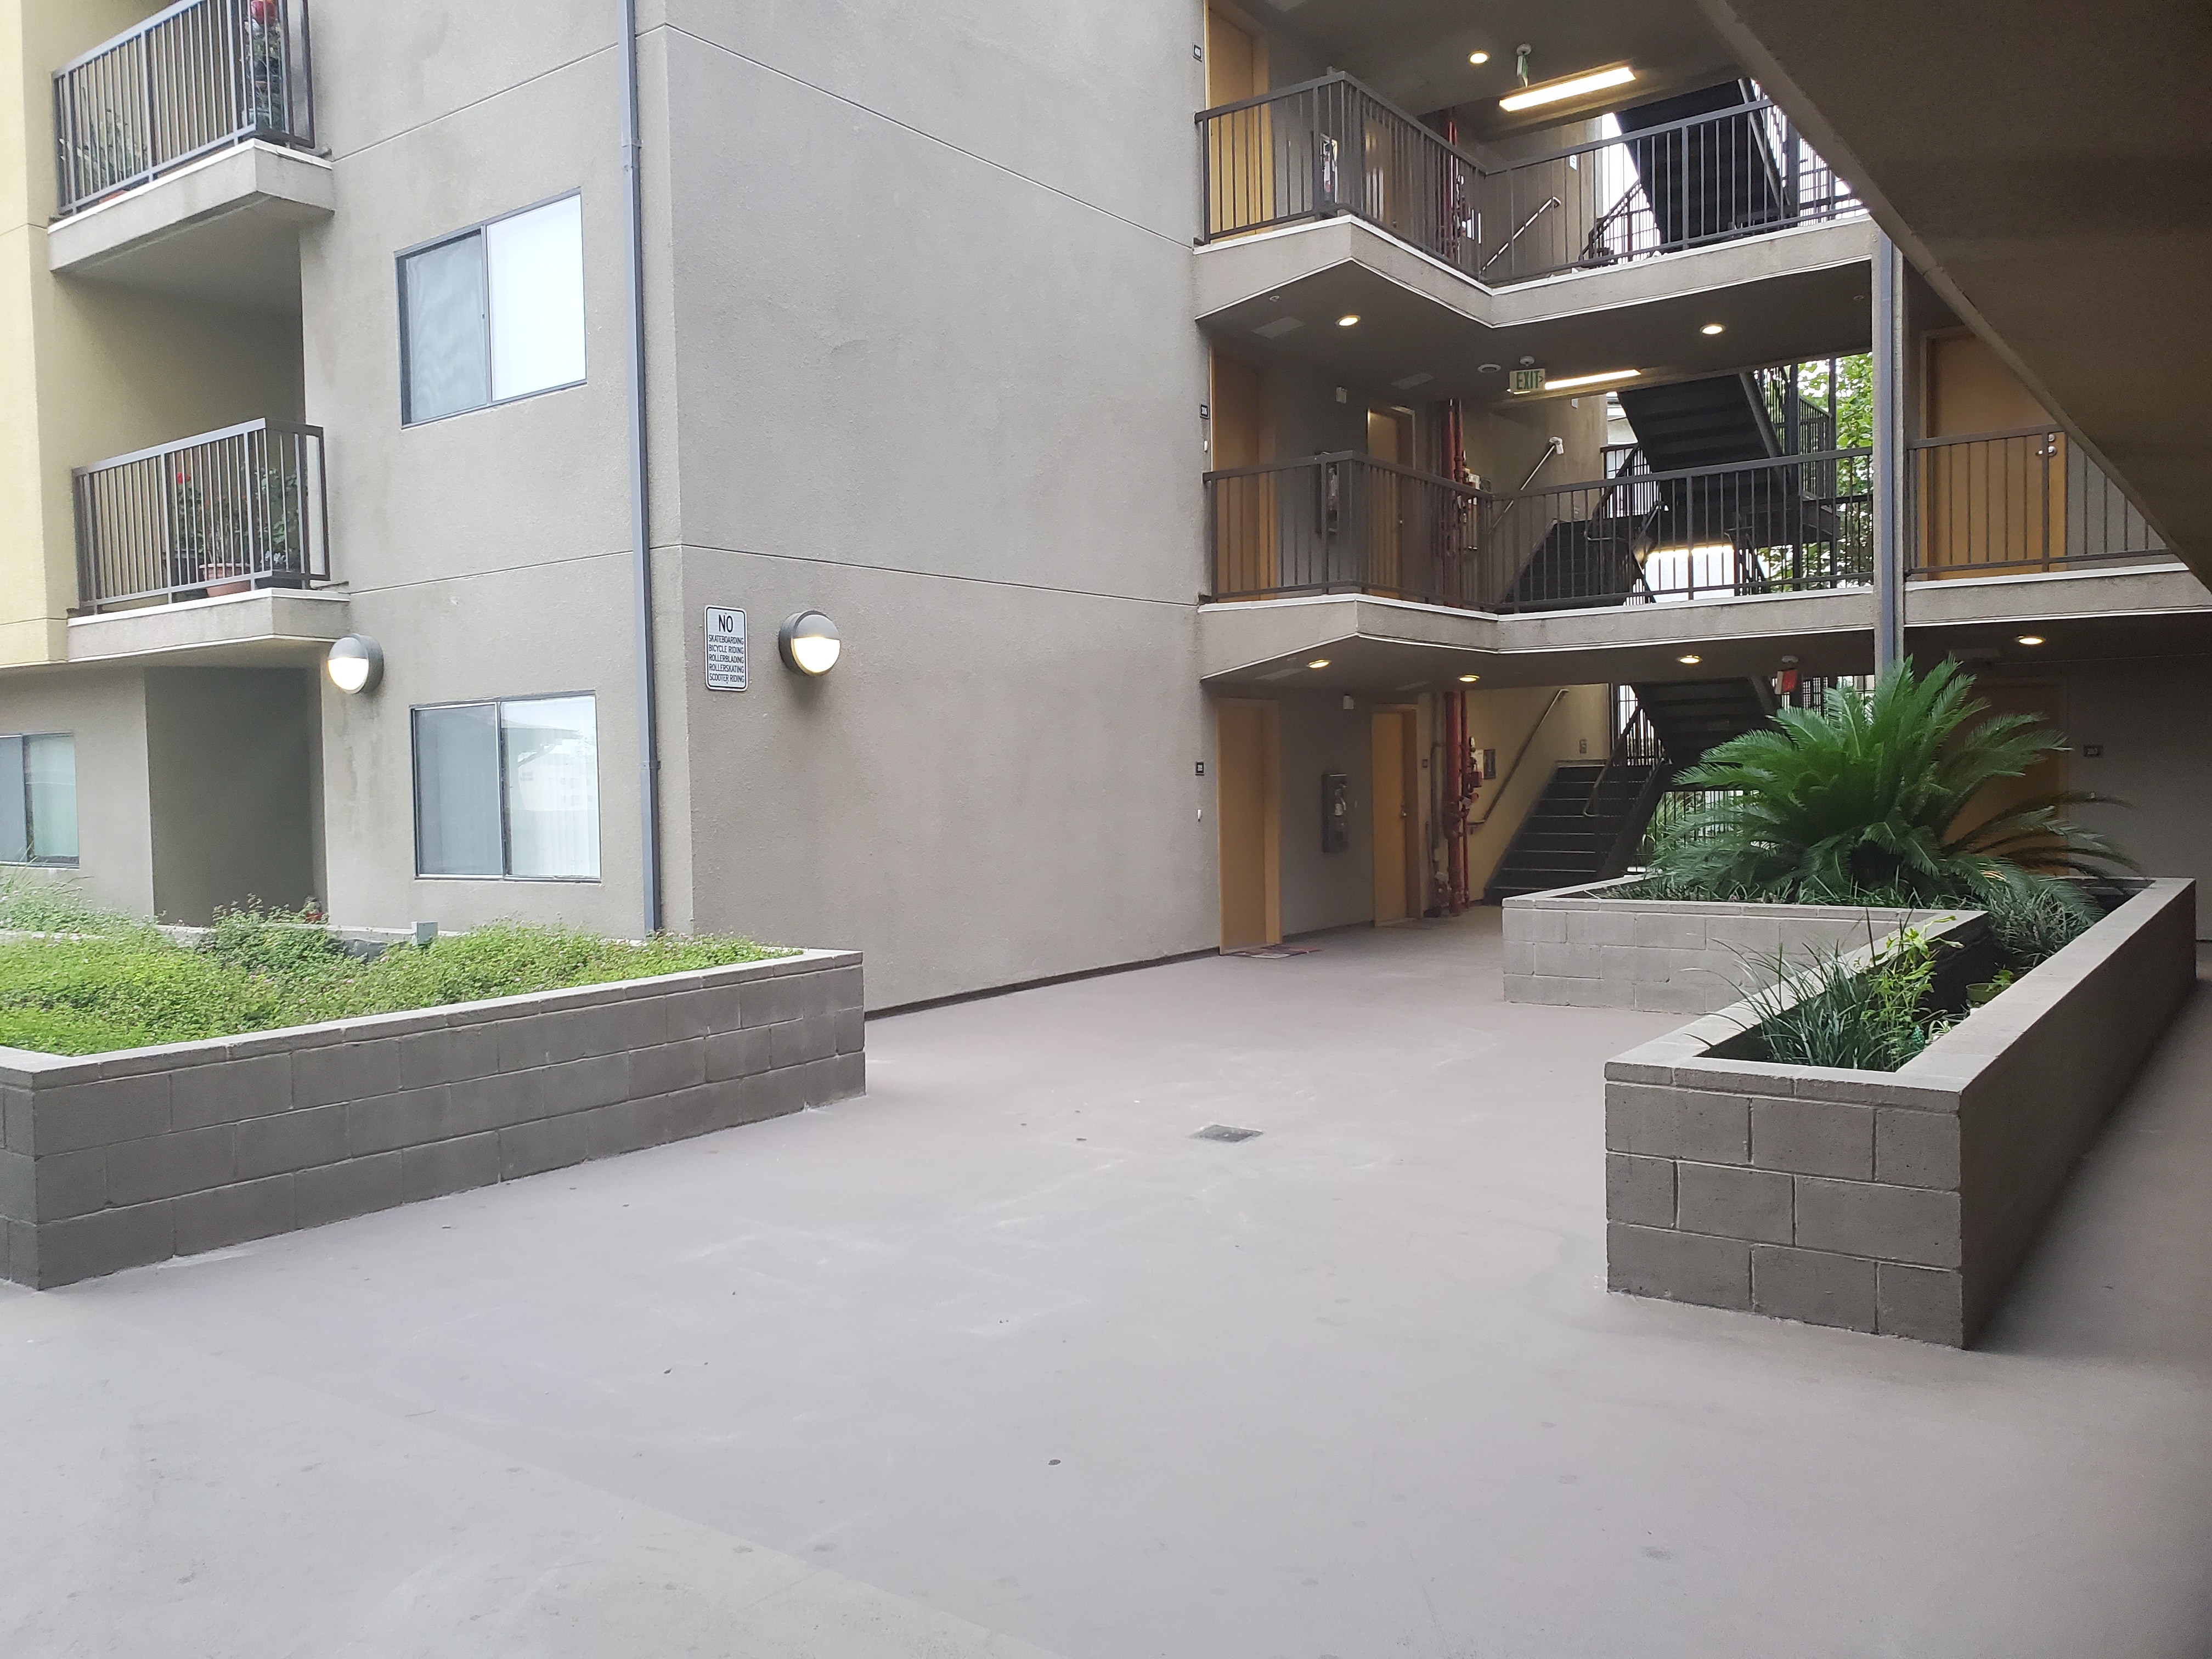 Side view of a courtyard, big concrete planters, stairways with handrails and security fence.